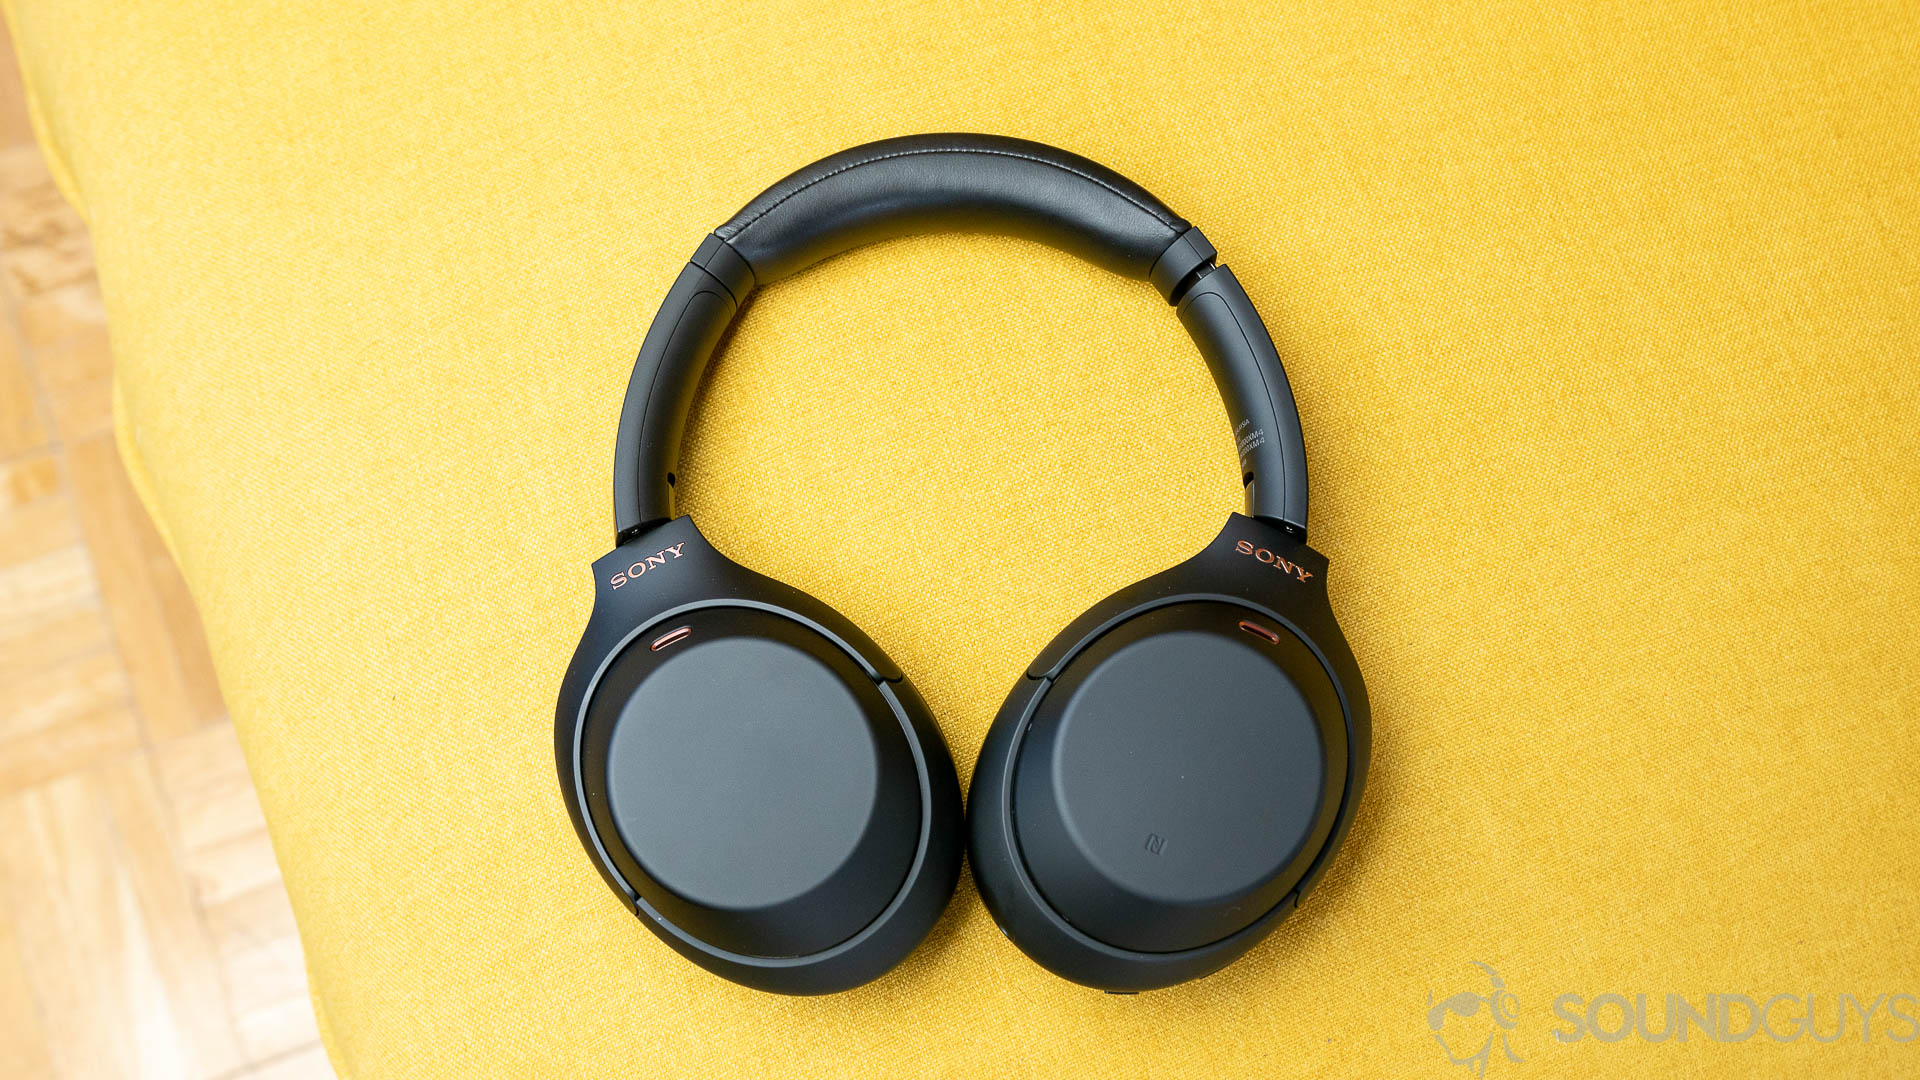 The Sony WH-1000XM4 noise canceling headphones against full yellow backdrop.